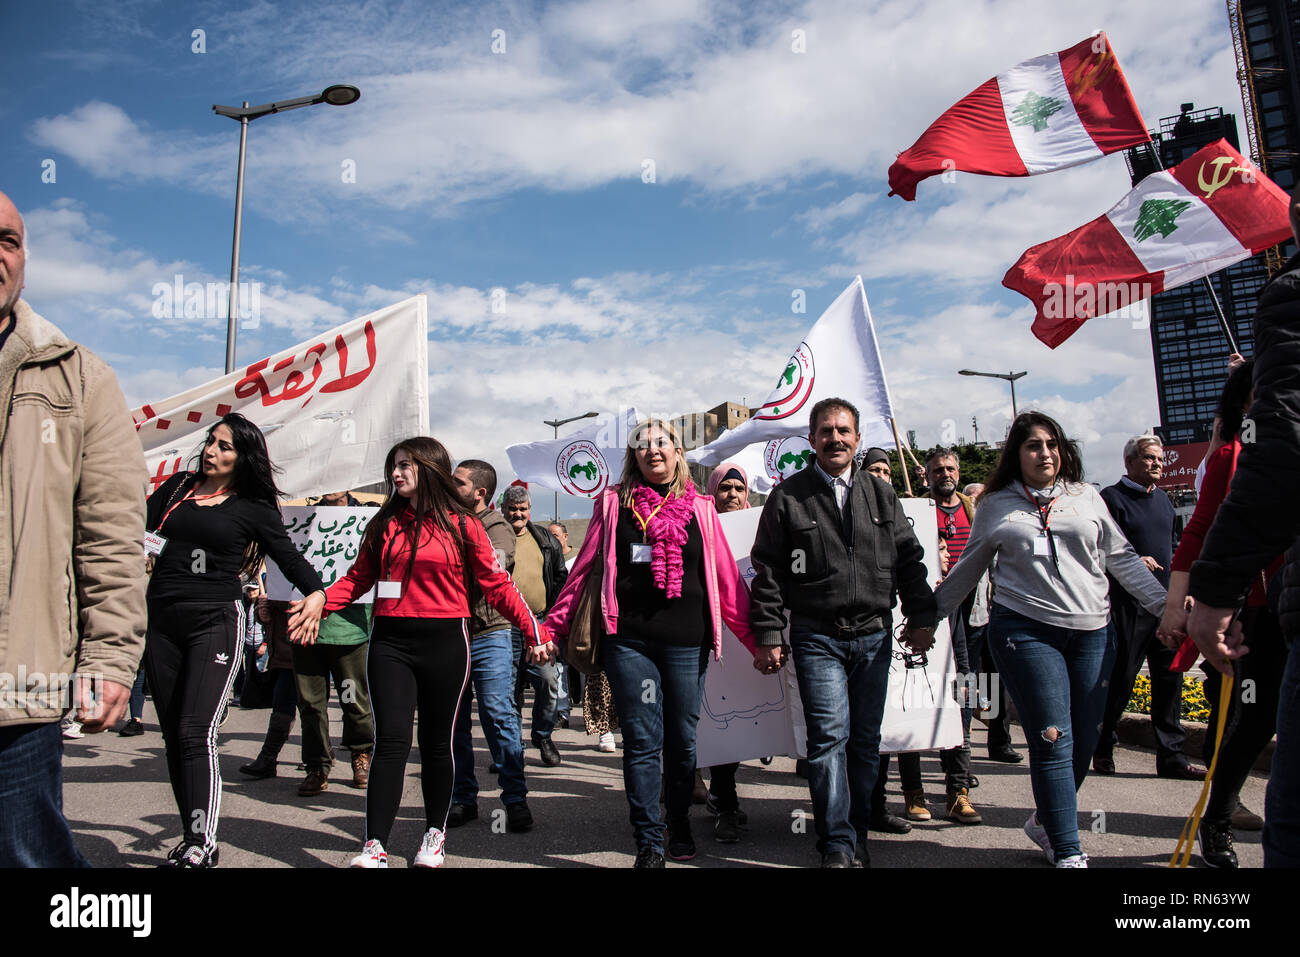 Beirut, Lebanon. 17th Feb, 2019. Citizens march through Beirut in protest of financial inequality and appalling lack of basic public services in Lebanon. Calling for a non-secular government structure, decent public services and an end to corruption, they say they will be coming out every two weeks to peacefully put pressure on a status quo that has been unbearable for too long. Beirut, Lebanon, 17 February 2019. Credit: Elizabeth Fitt/Alamy Live News Stock Photo